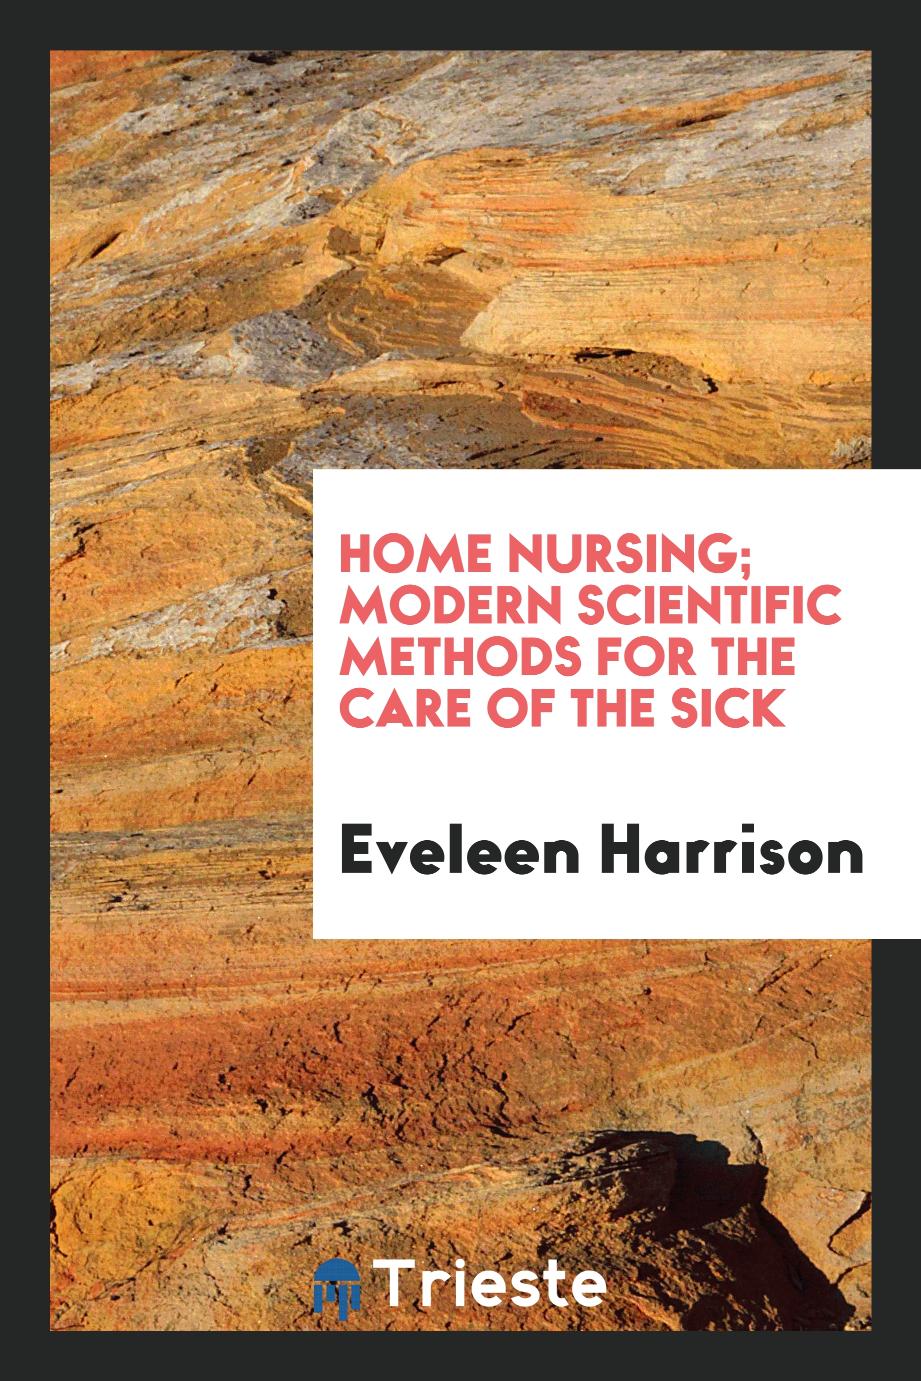 Home nursing; modern scientific methods for the care of the sick